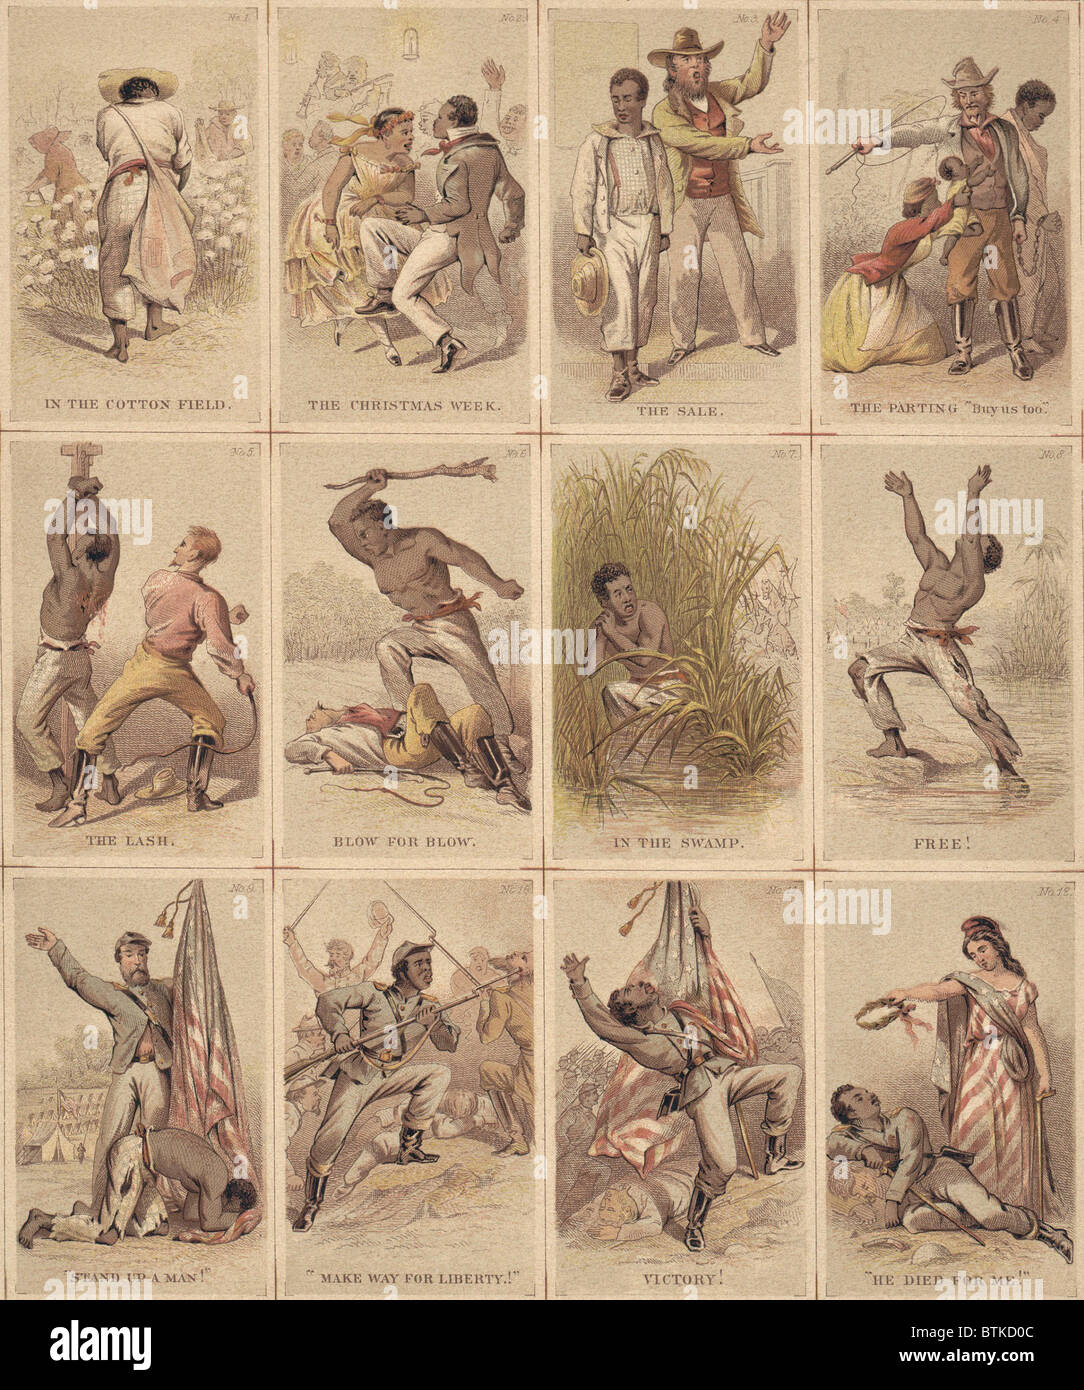 Twelve illustrated cards narrating the journey of a slave from plantation life to the struggle for liberty, for which he gives his life, as a Union soldier during the Civil War. Ca. 1863 Stock Photo